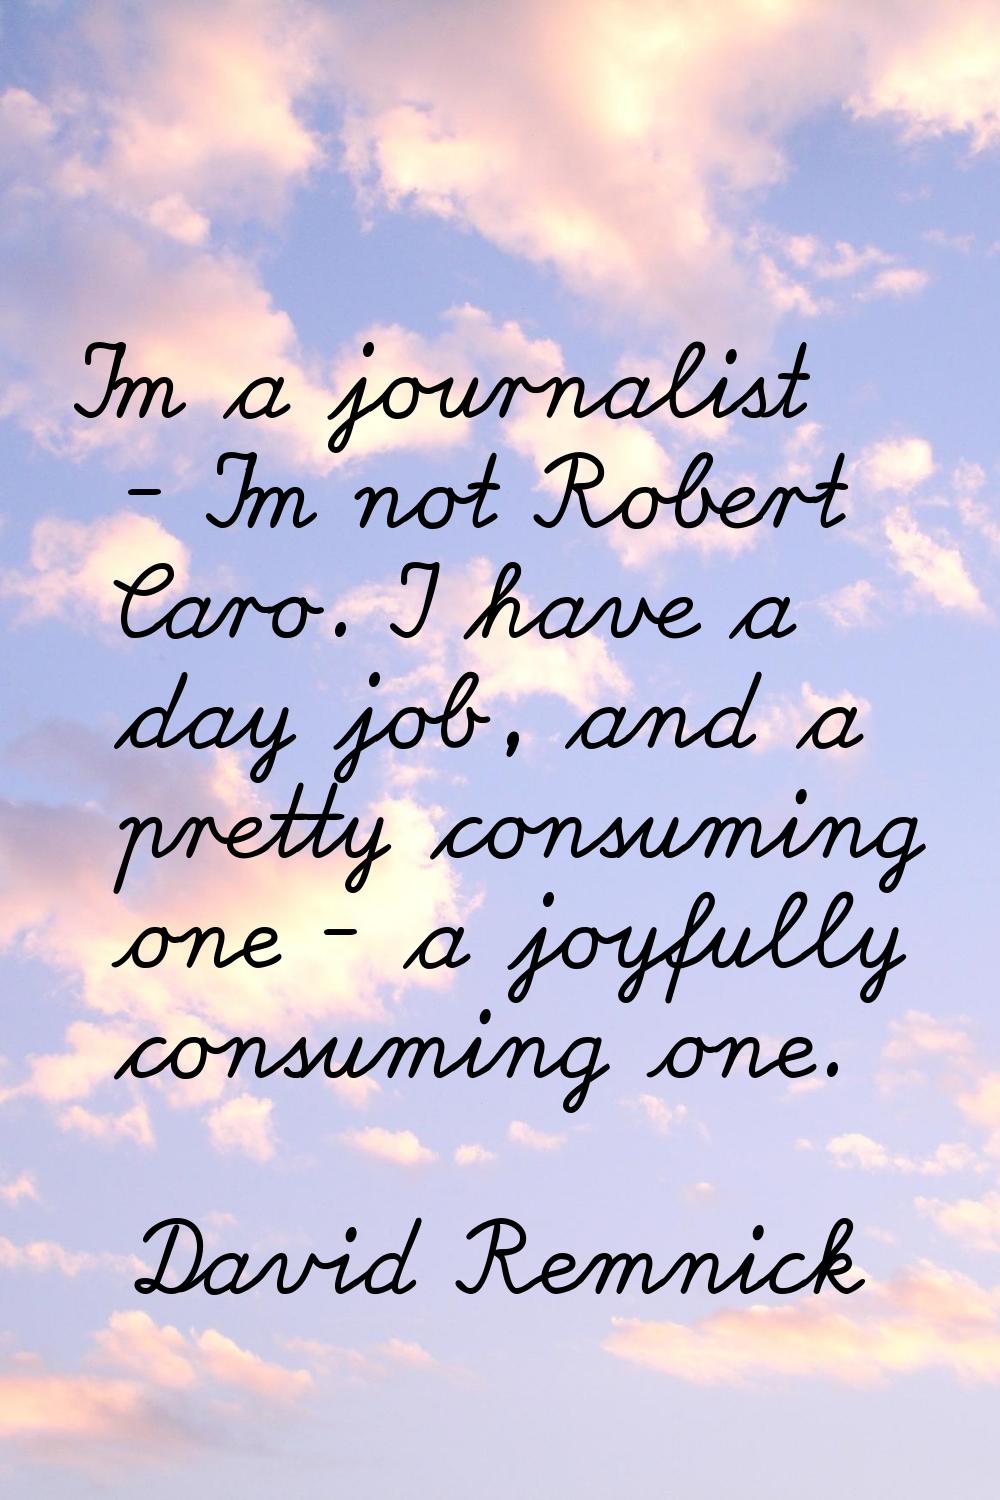 I'm a journalist - I'm not Robert Caro. I have a day job, and a pretty consuming one - a joyfully c